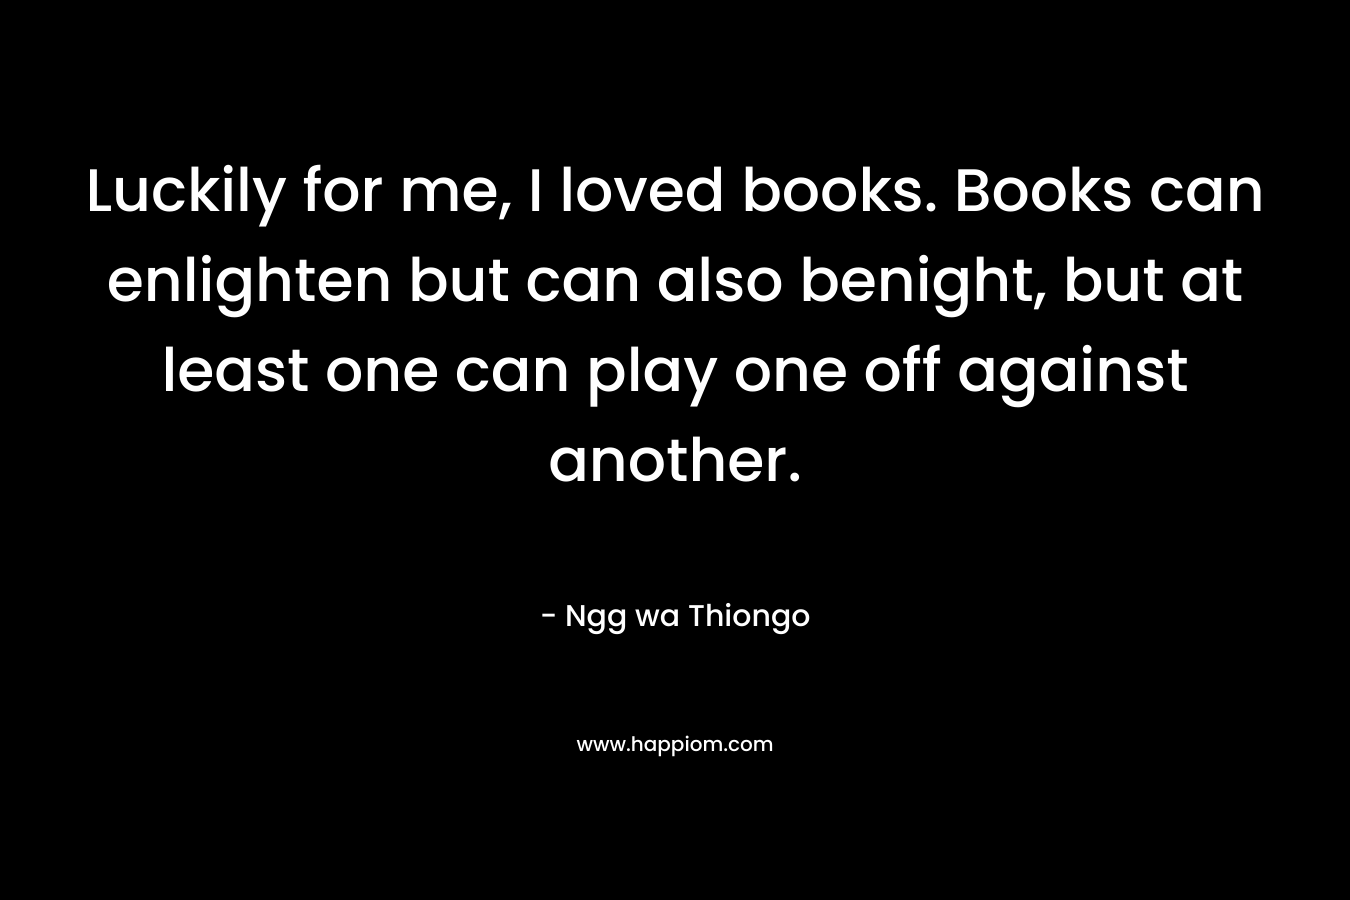 Luckily for me, I loved books. Books can enlighten but can also benight, but at least one can play one off against another.